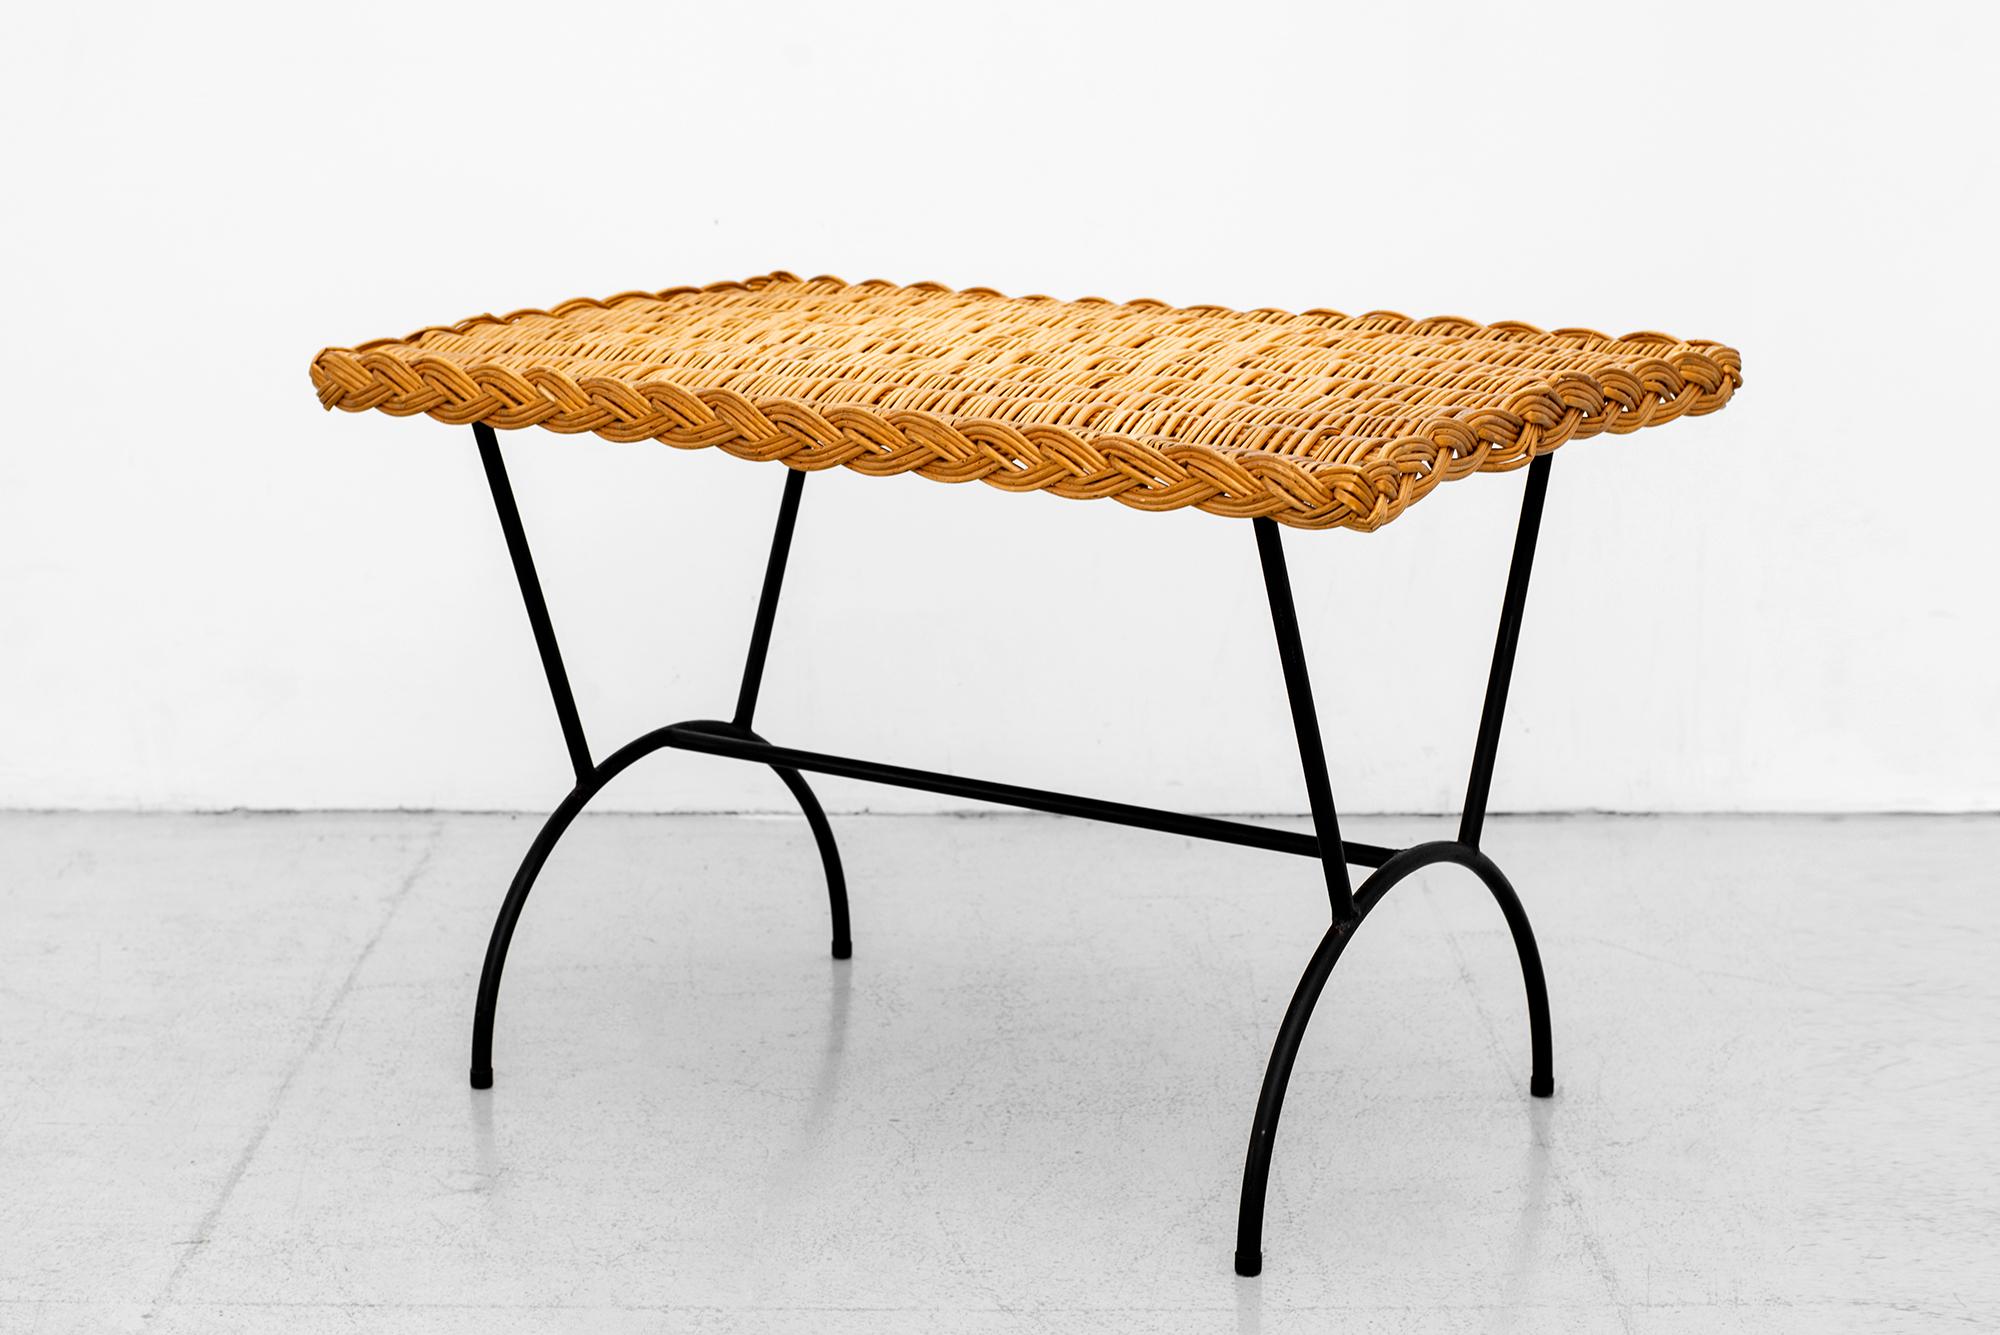 Italian wicker coffee table with iron base and woven braided wicker detail.
   

Measures: Table
W 32 1/2”
D 20 1/2”
H 20”.